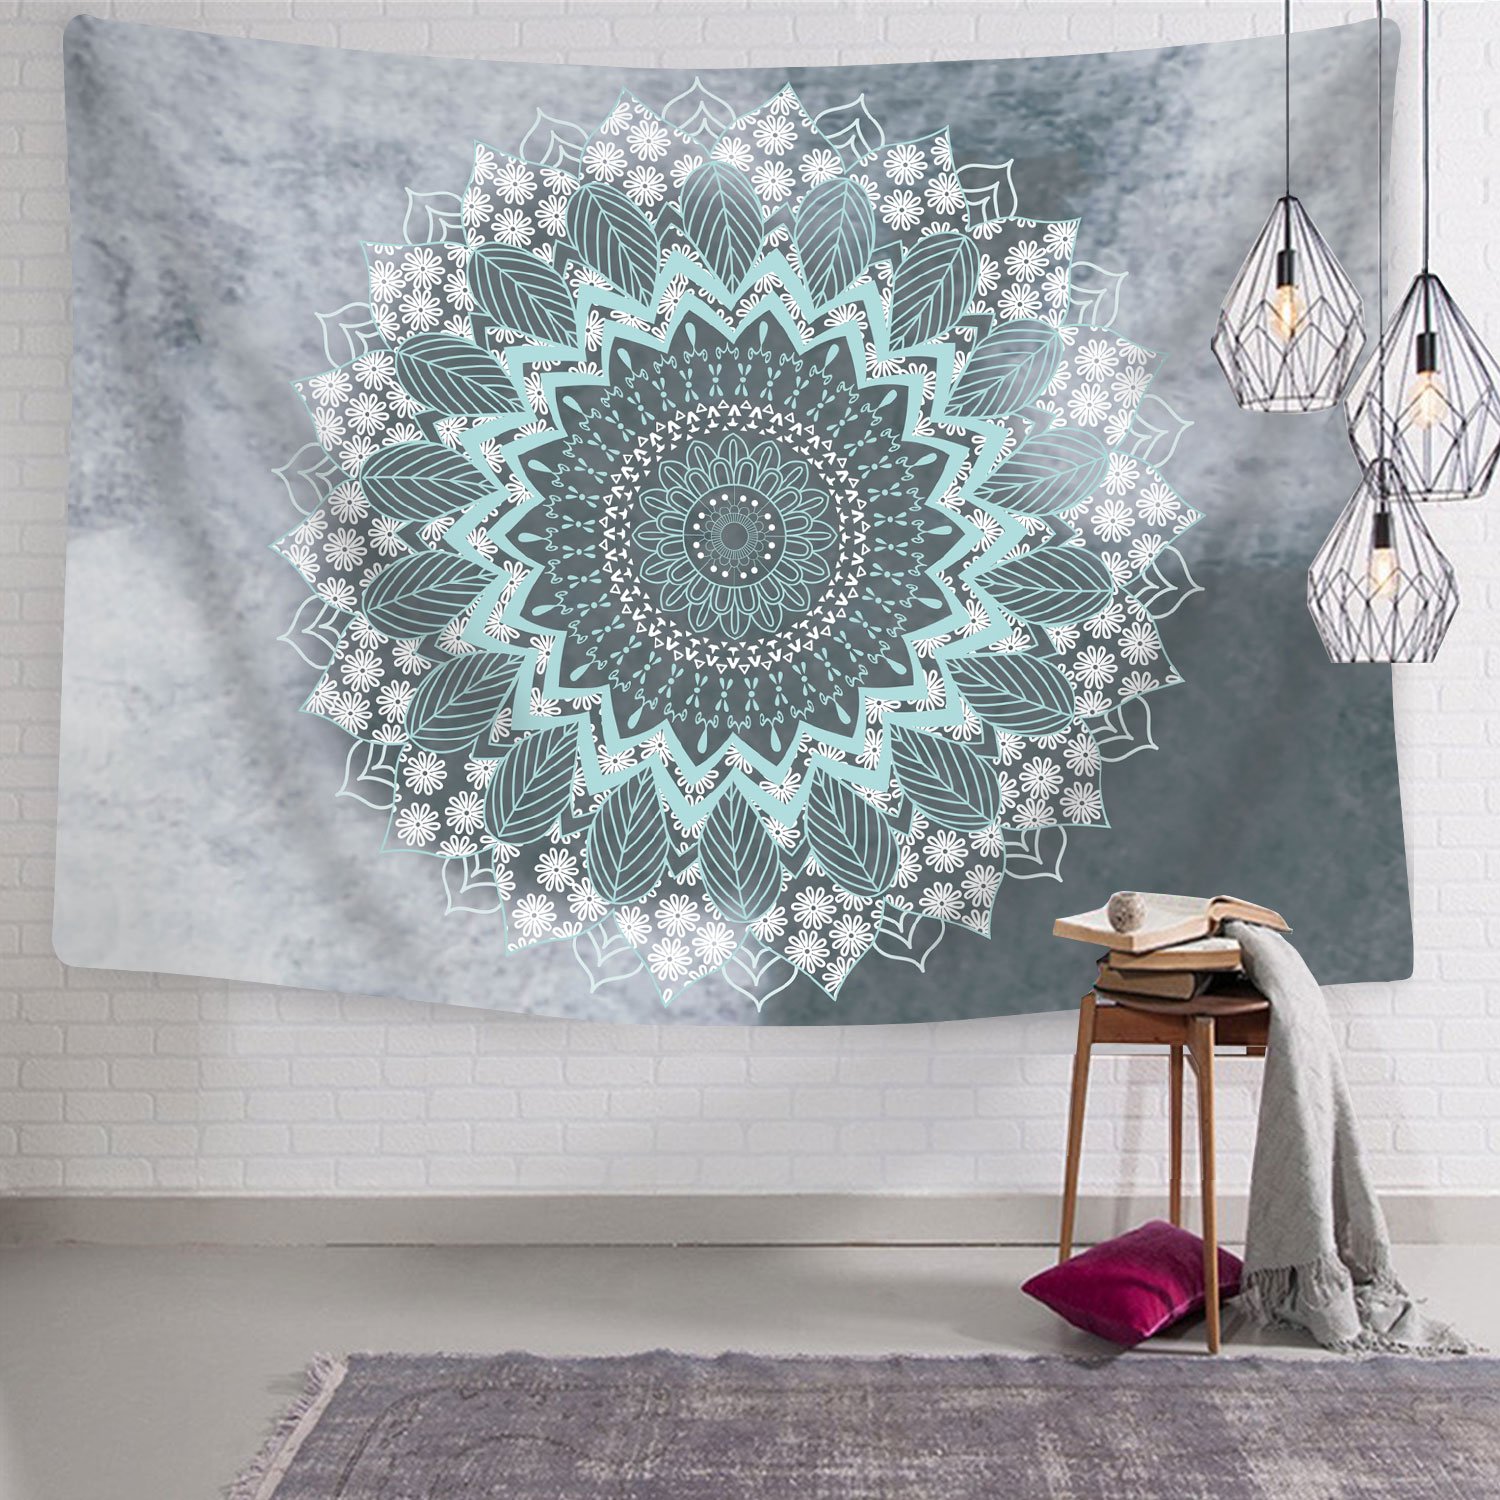 Book Cover Likiyol Tapestry Mandala Hippie Bohemian Tapestries Wall Hanging Flower Psychedelic Tapestry Wall Hanging Indian Dorm Decor for Living Room Bedroom (Teal, 51.2 x 59.1 inches) Teal 51